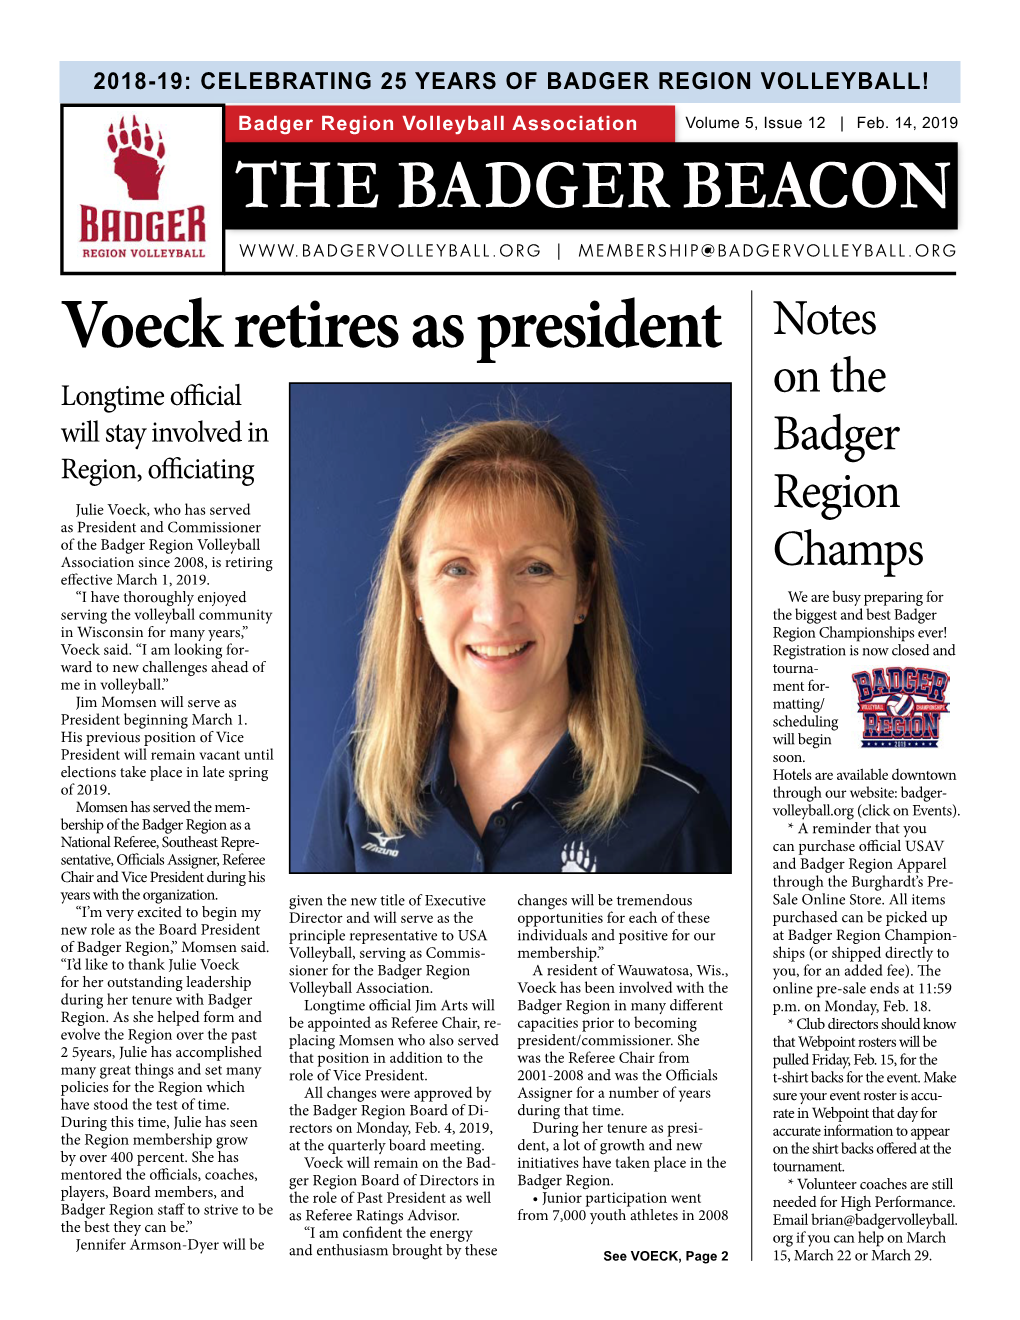 THE BADGER BEACON Voeck Retires As President Notes